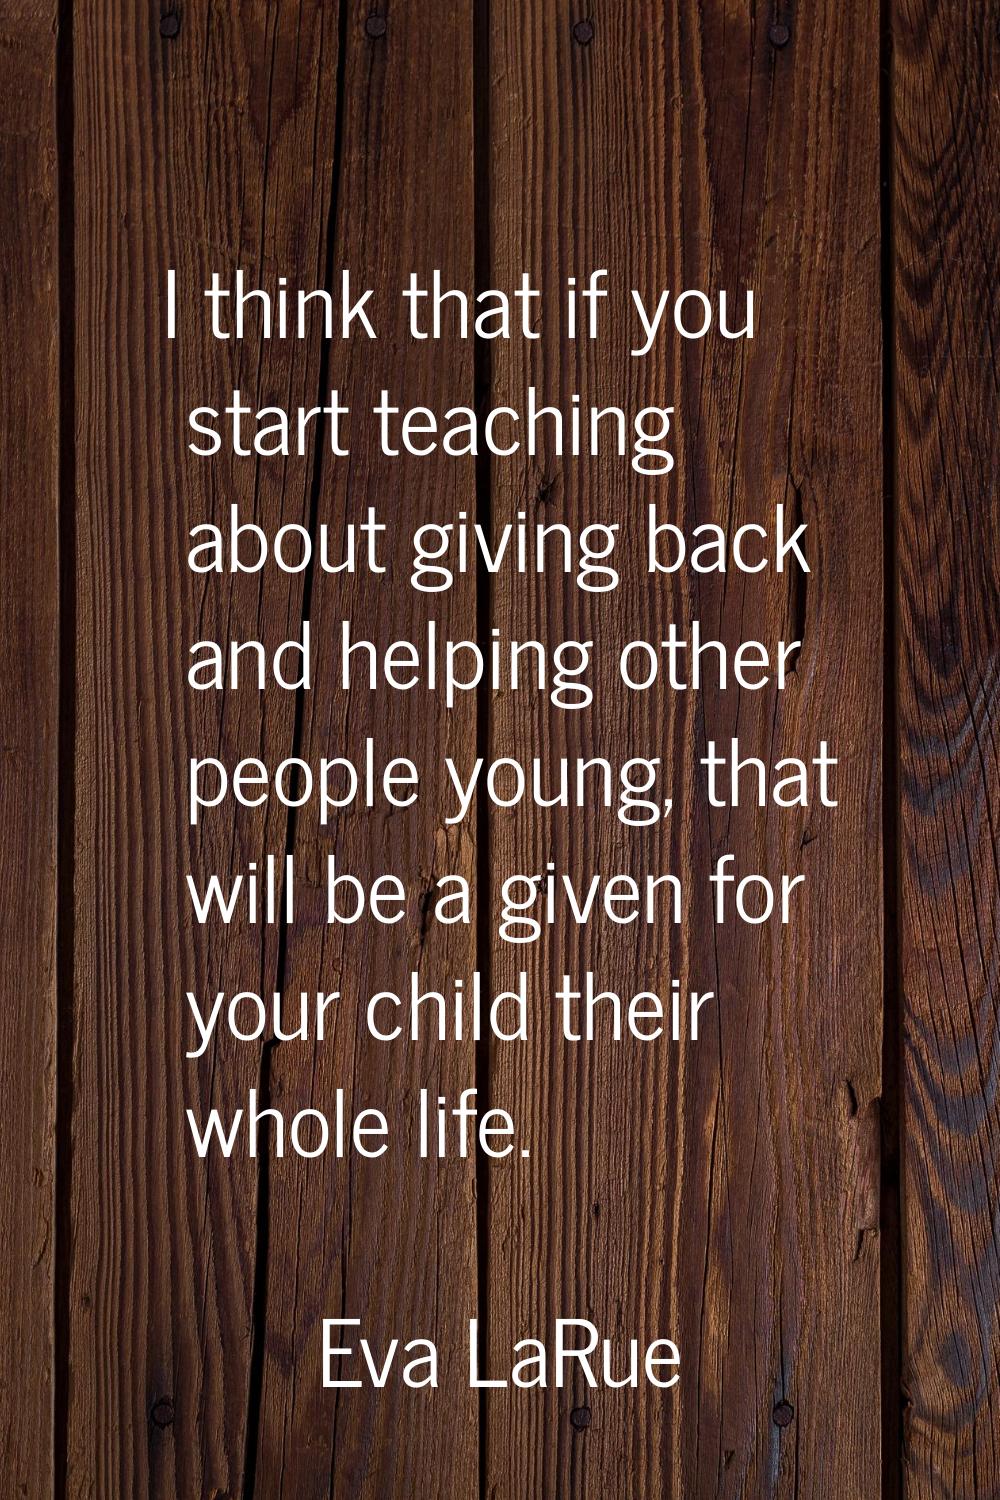 I think that if you start teaching about giving back and helping other people young, that will be a